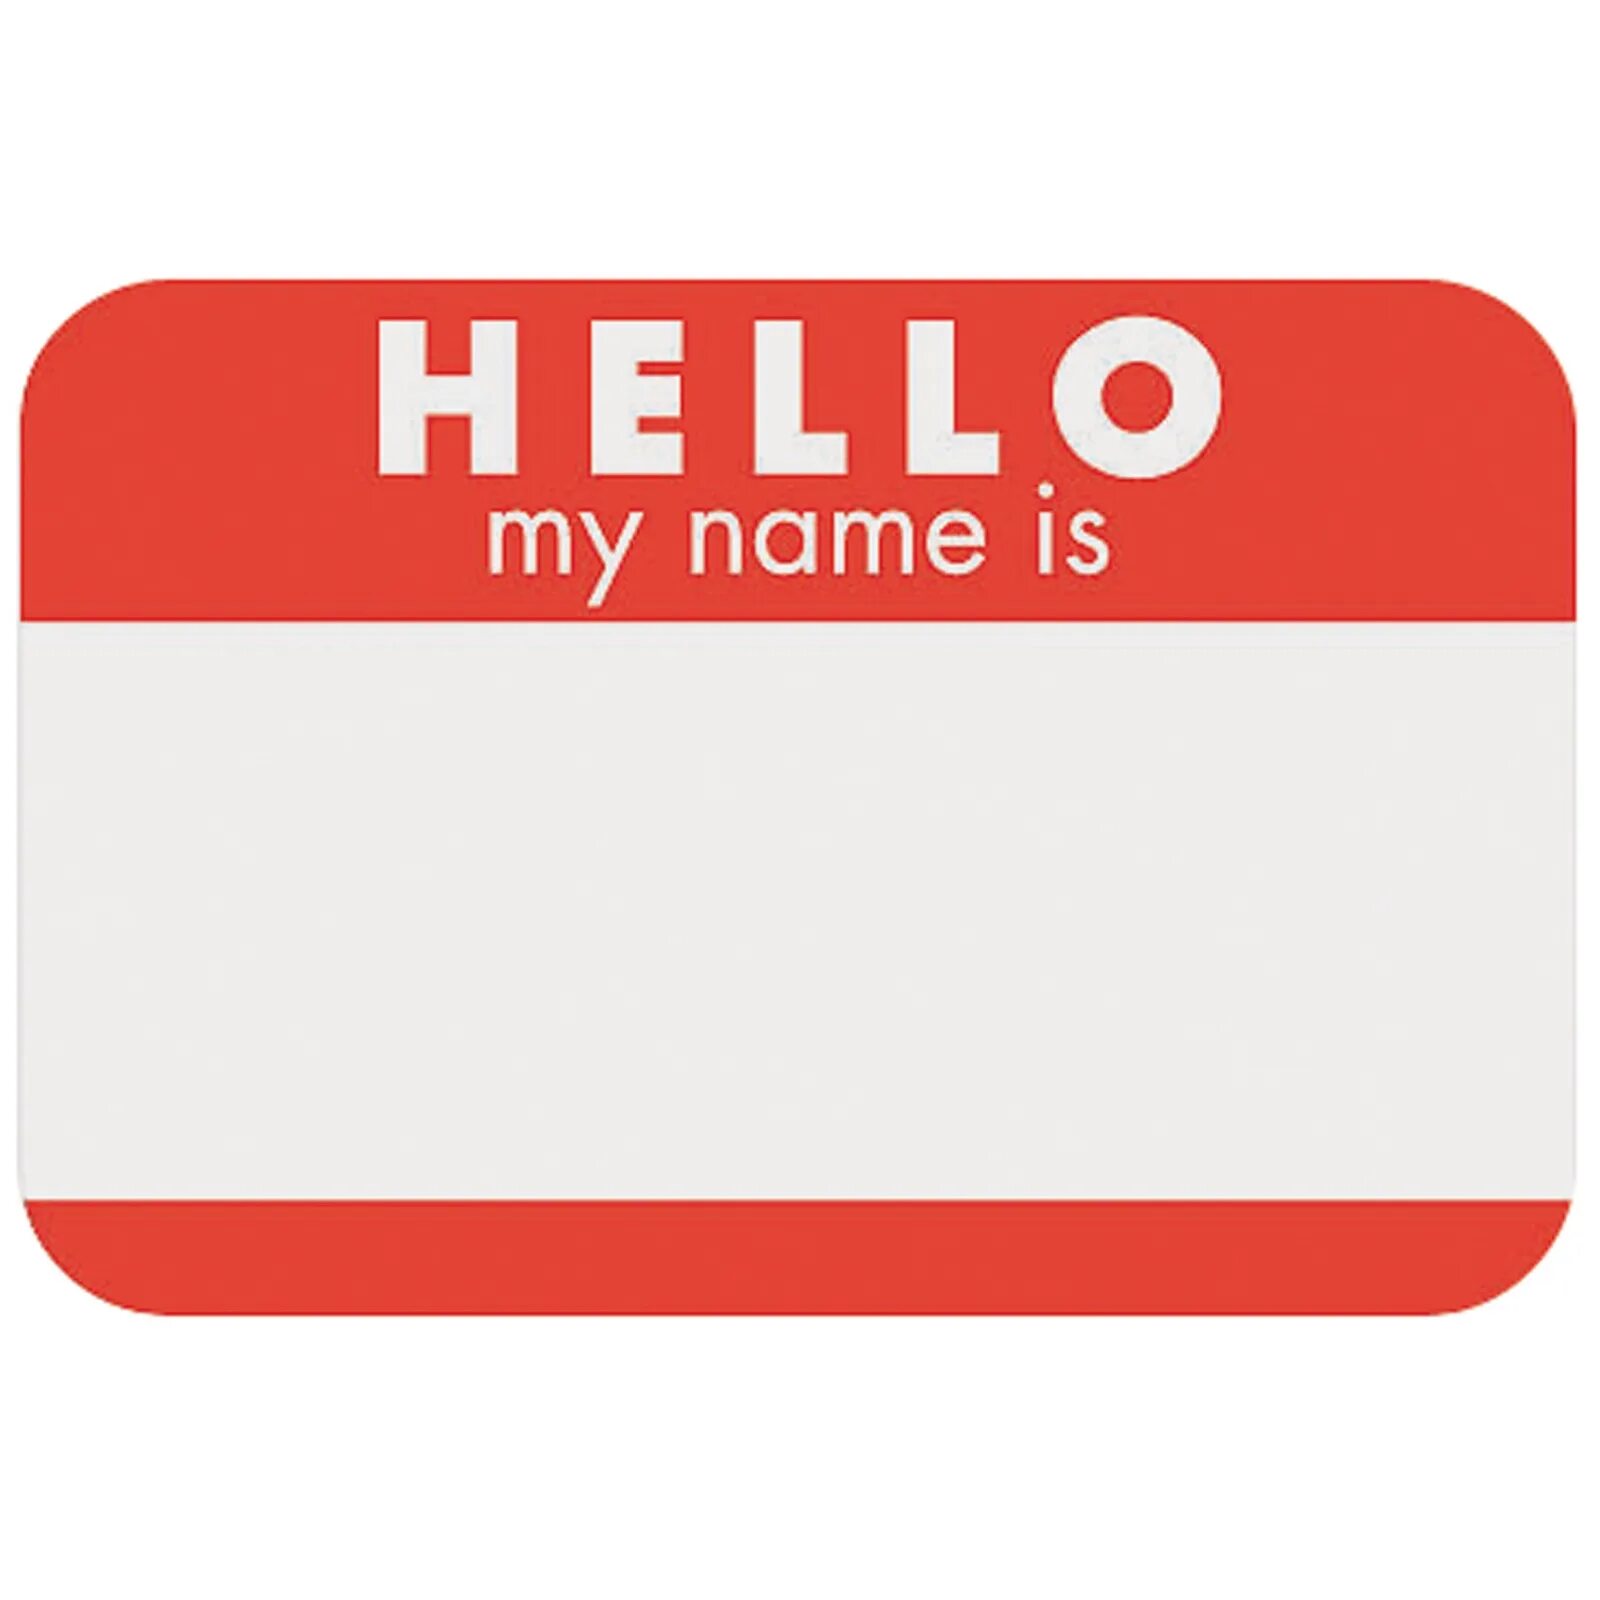 Hello i am low. Стикеры hello. Наклейки hello my name is. Стикеры my name is. Стикеры для граффити hello my name is.